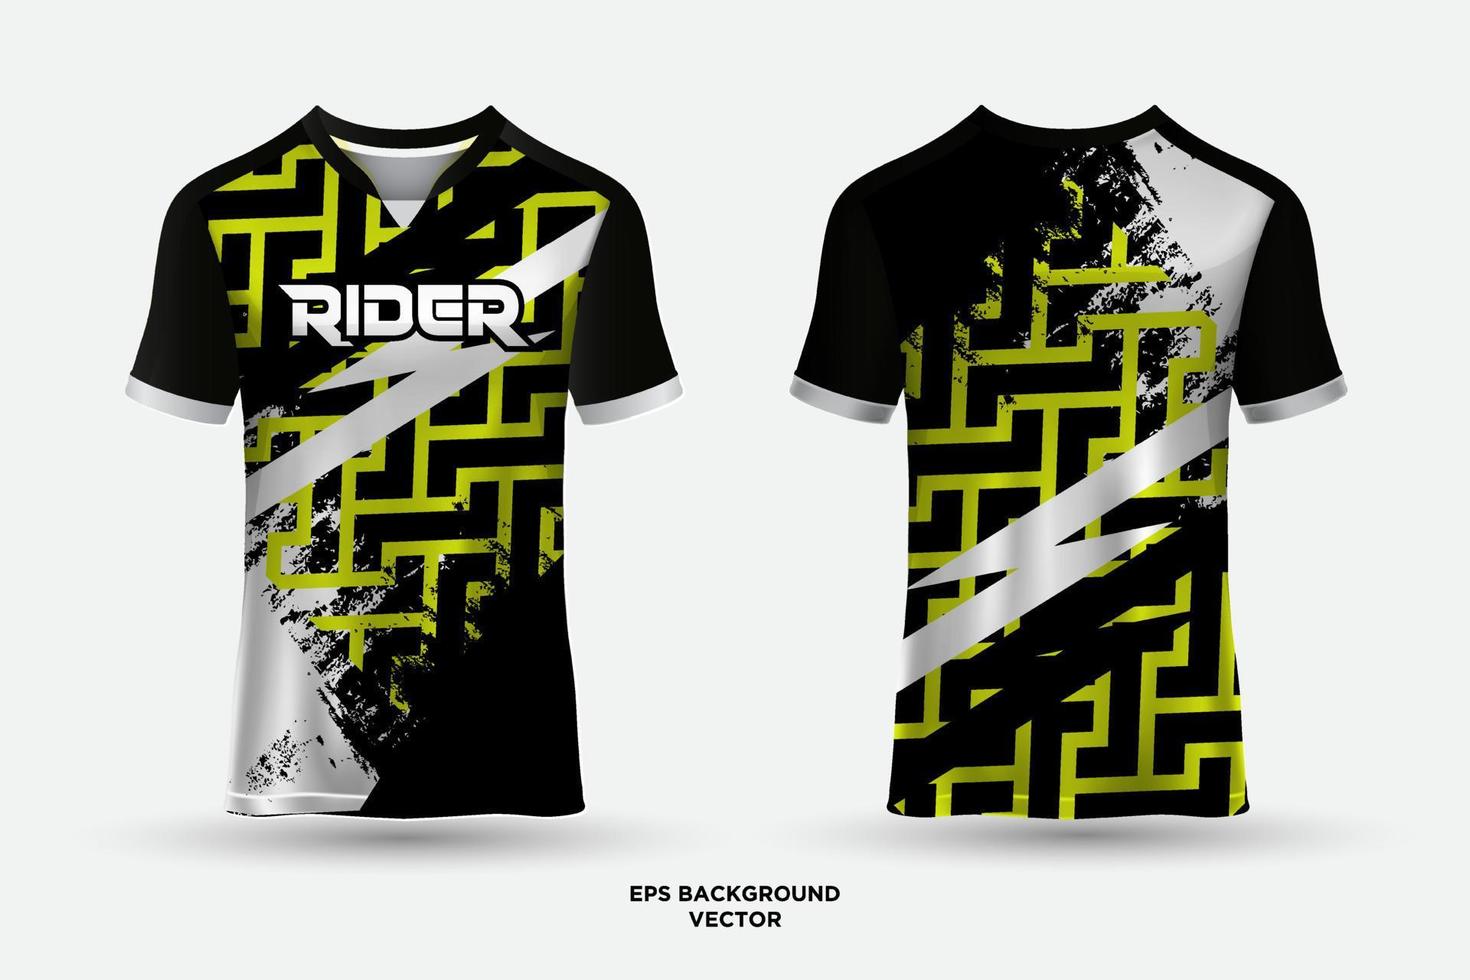 Futuristic and modern design jersey suitable for racing, soccer, gaming ...